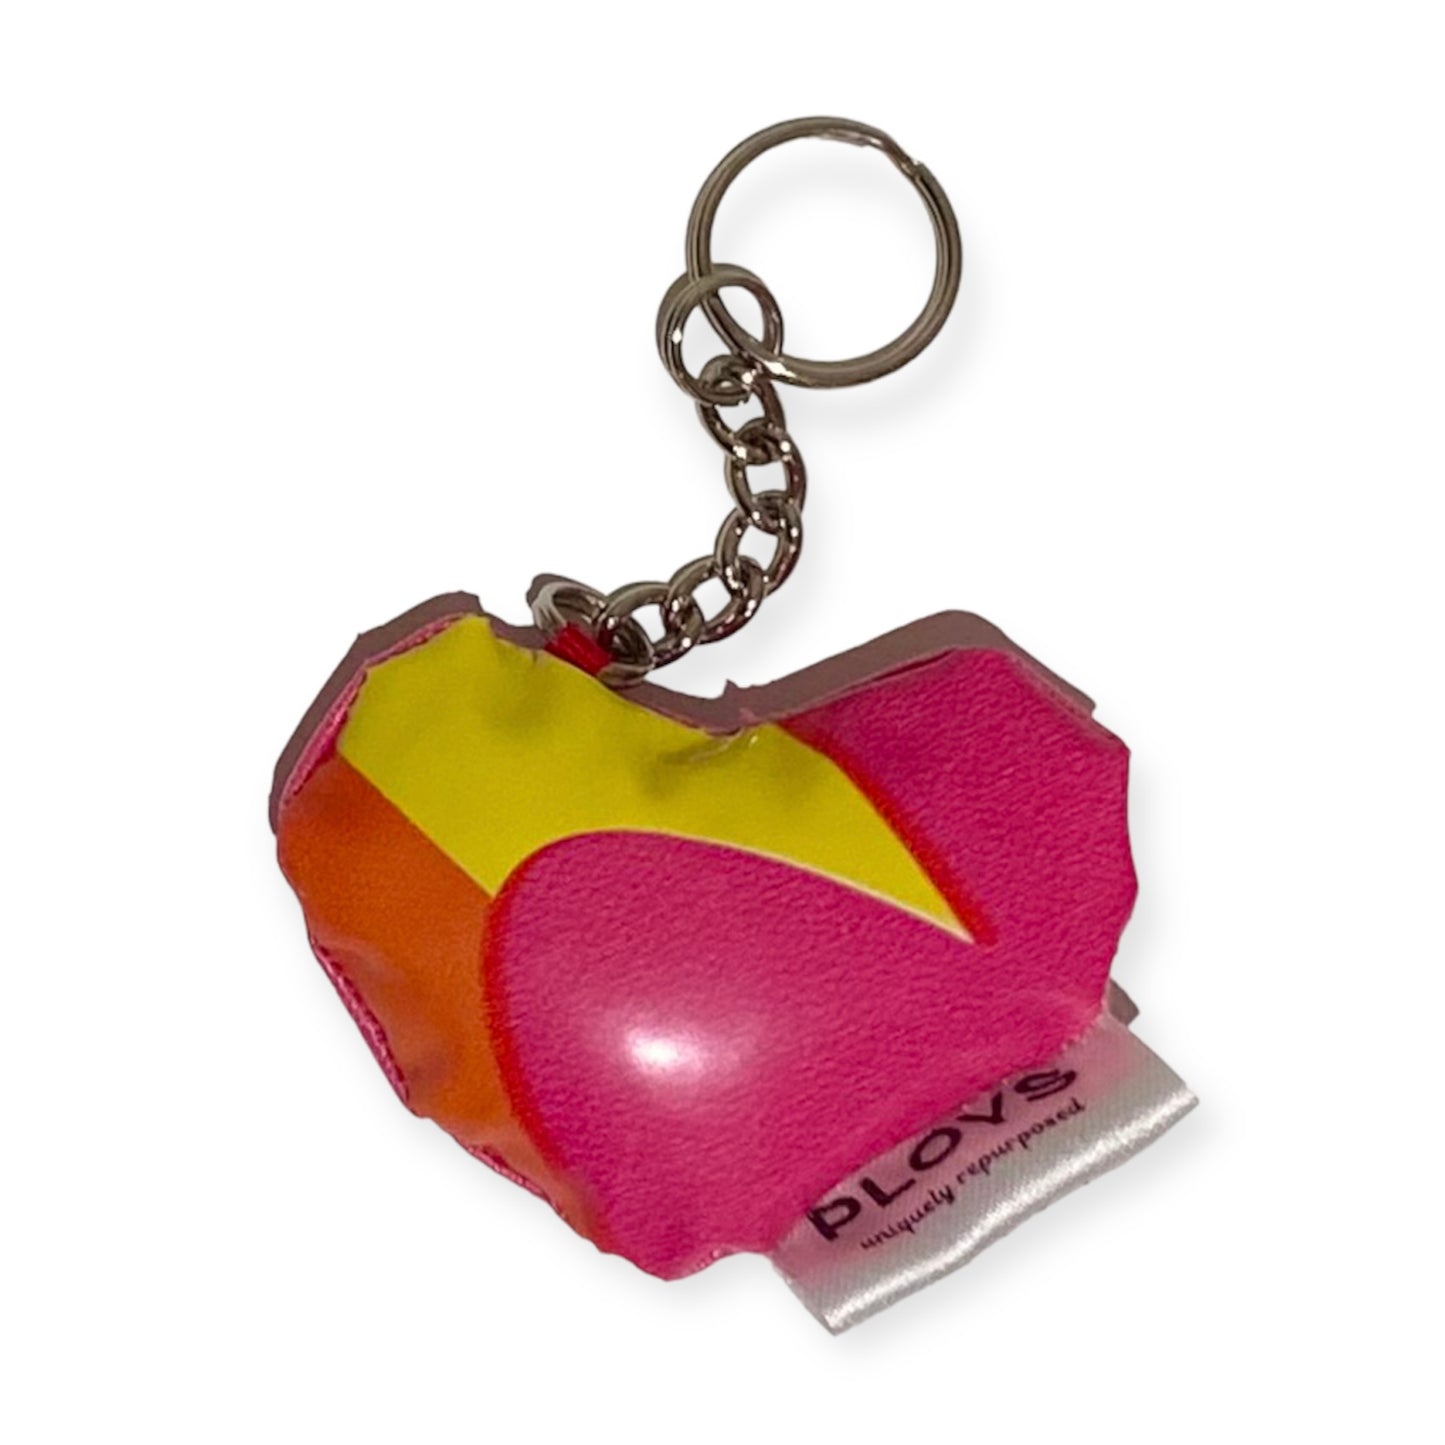 Keyring - recycled inflatables